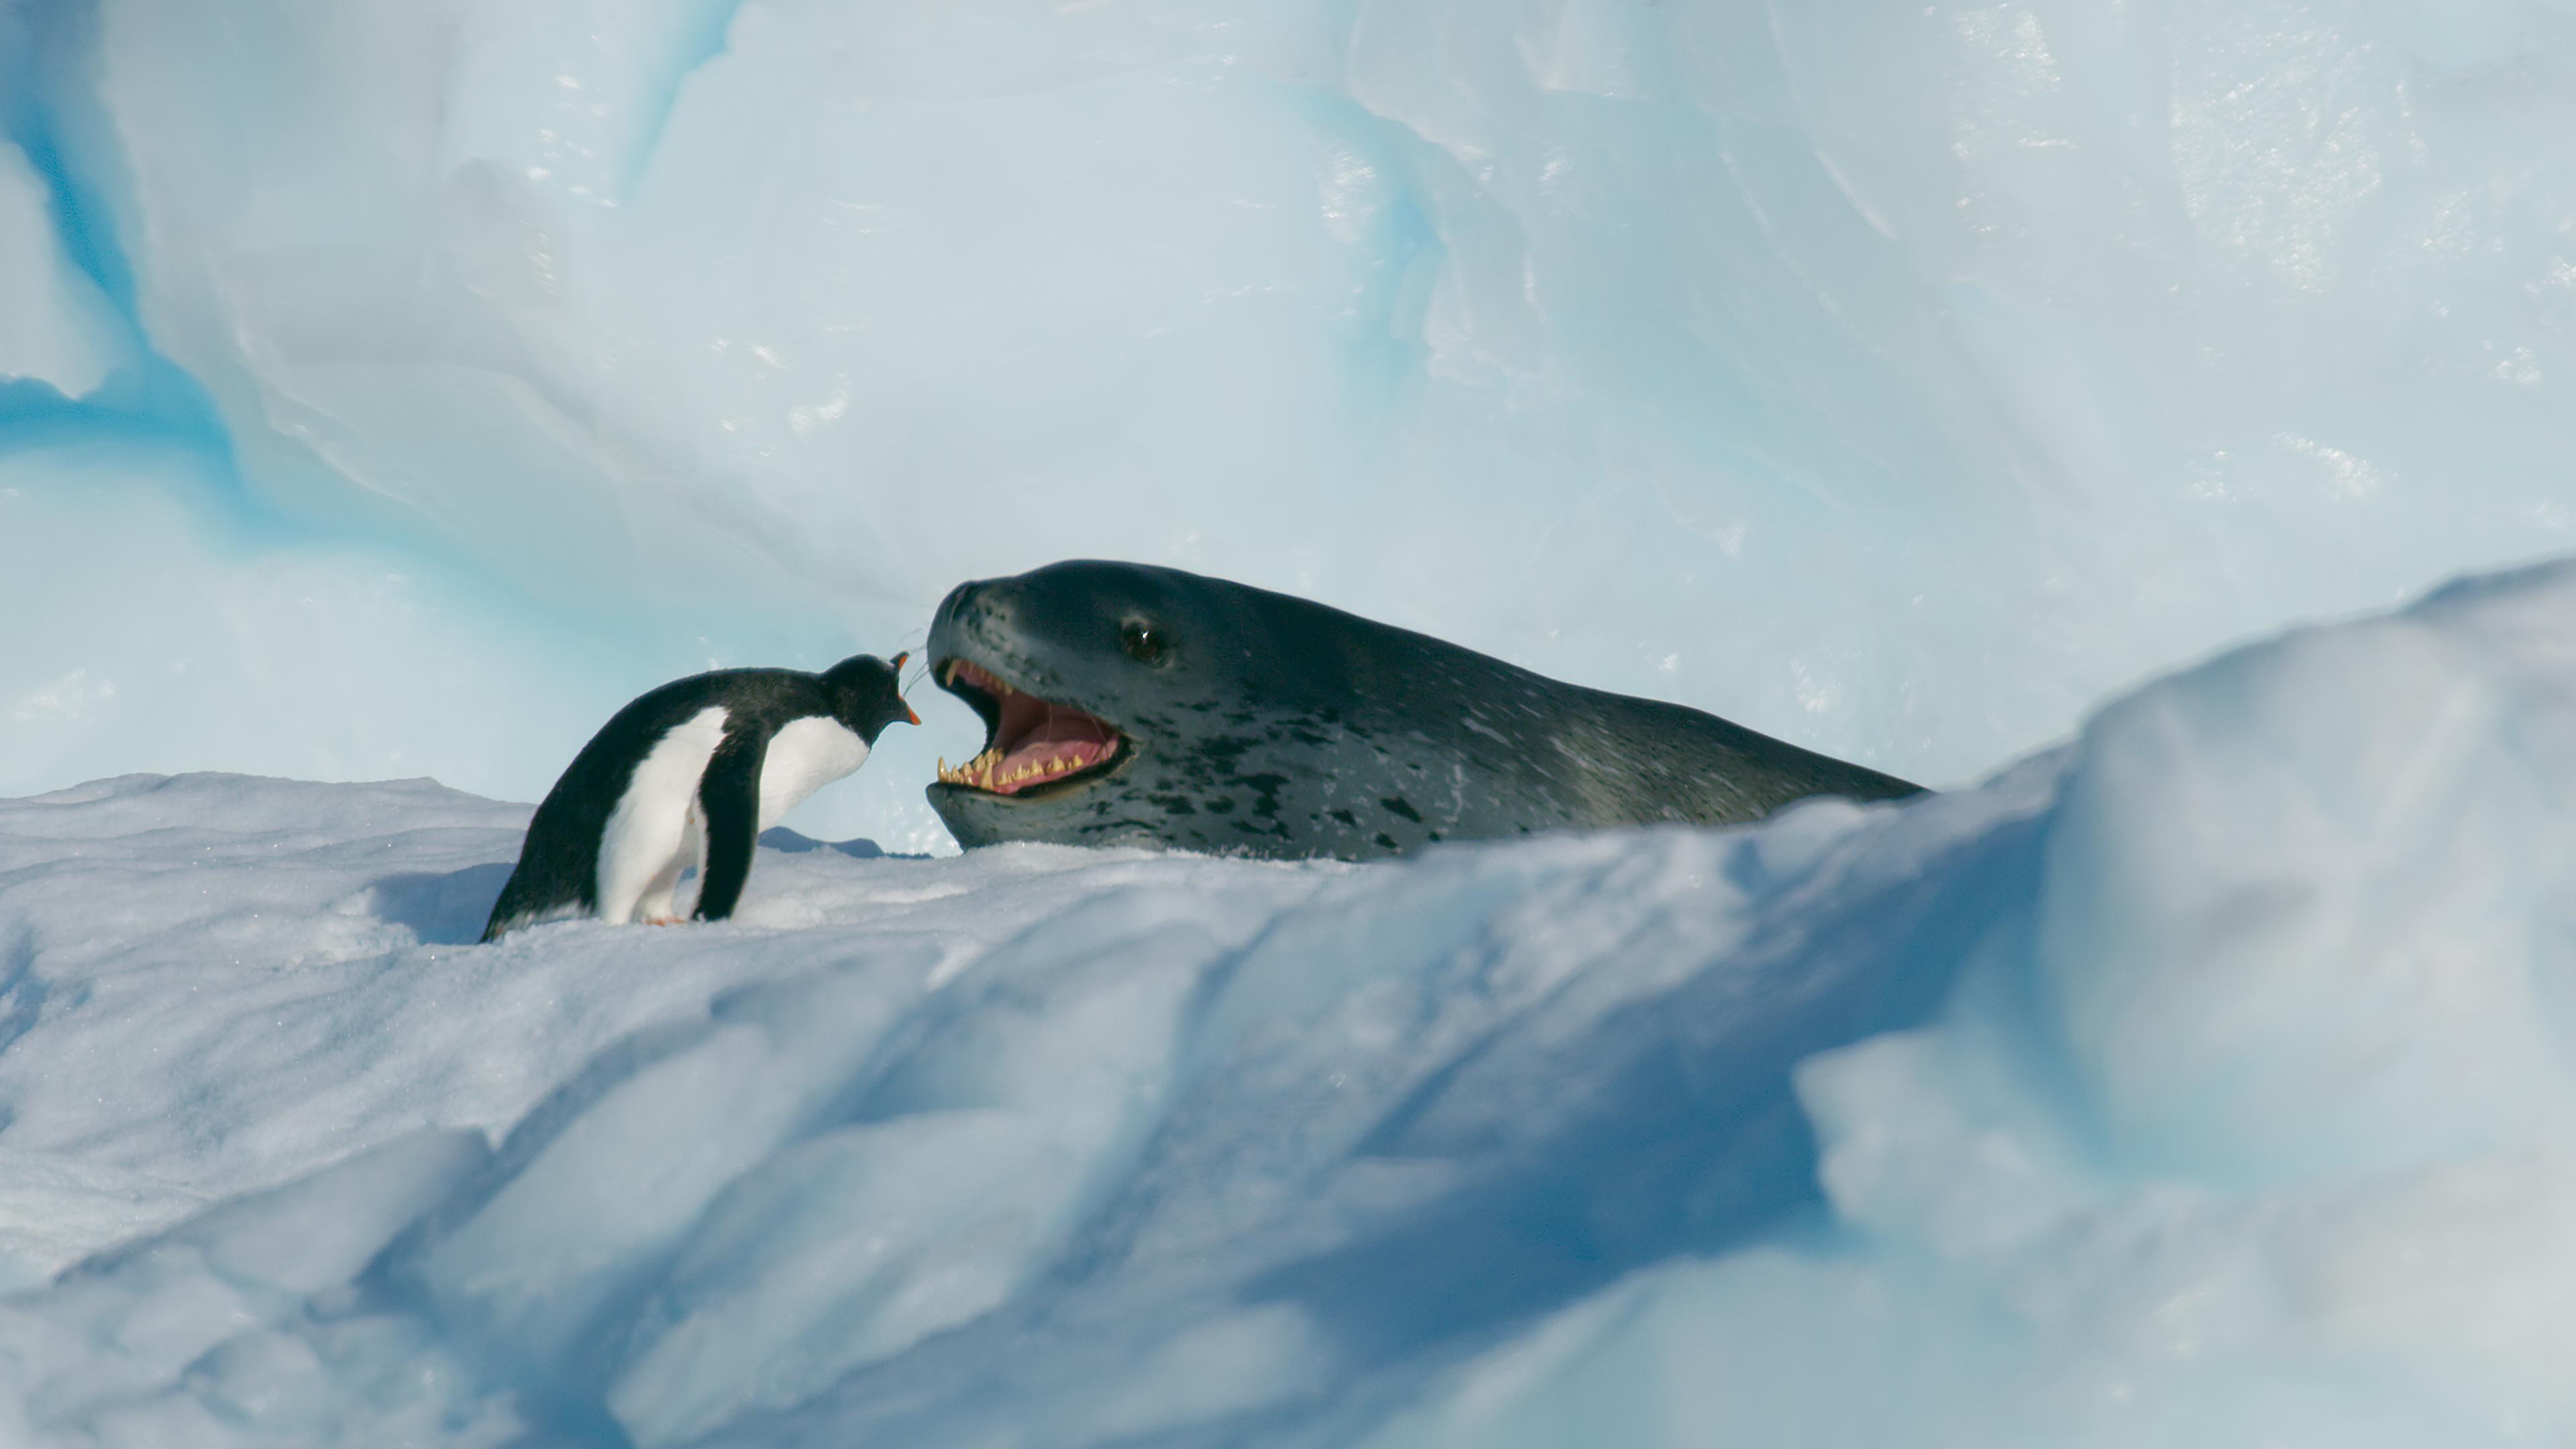 The Hong Kong Space Museum is screening a new 3D dome show, "Antarctica 3D", at its Space Theatre starting from April 1 (Monday) to lead audiences to explore the Antarctica. Photo shows a Gentoo Penguin and a leopard seal on the sea ice in Antarctica. (Photo source: BBC NHU)